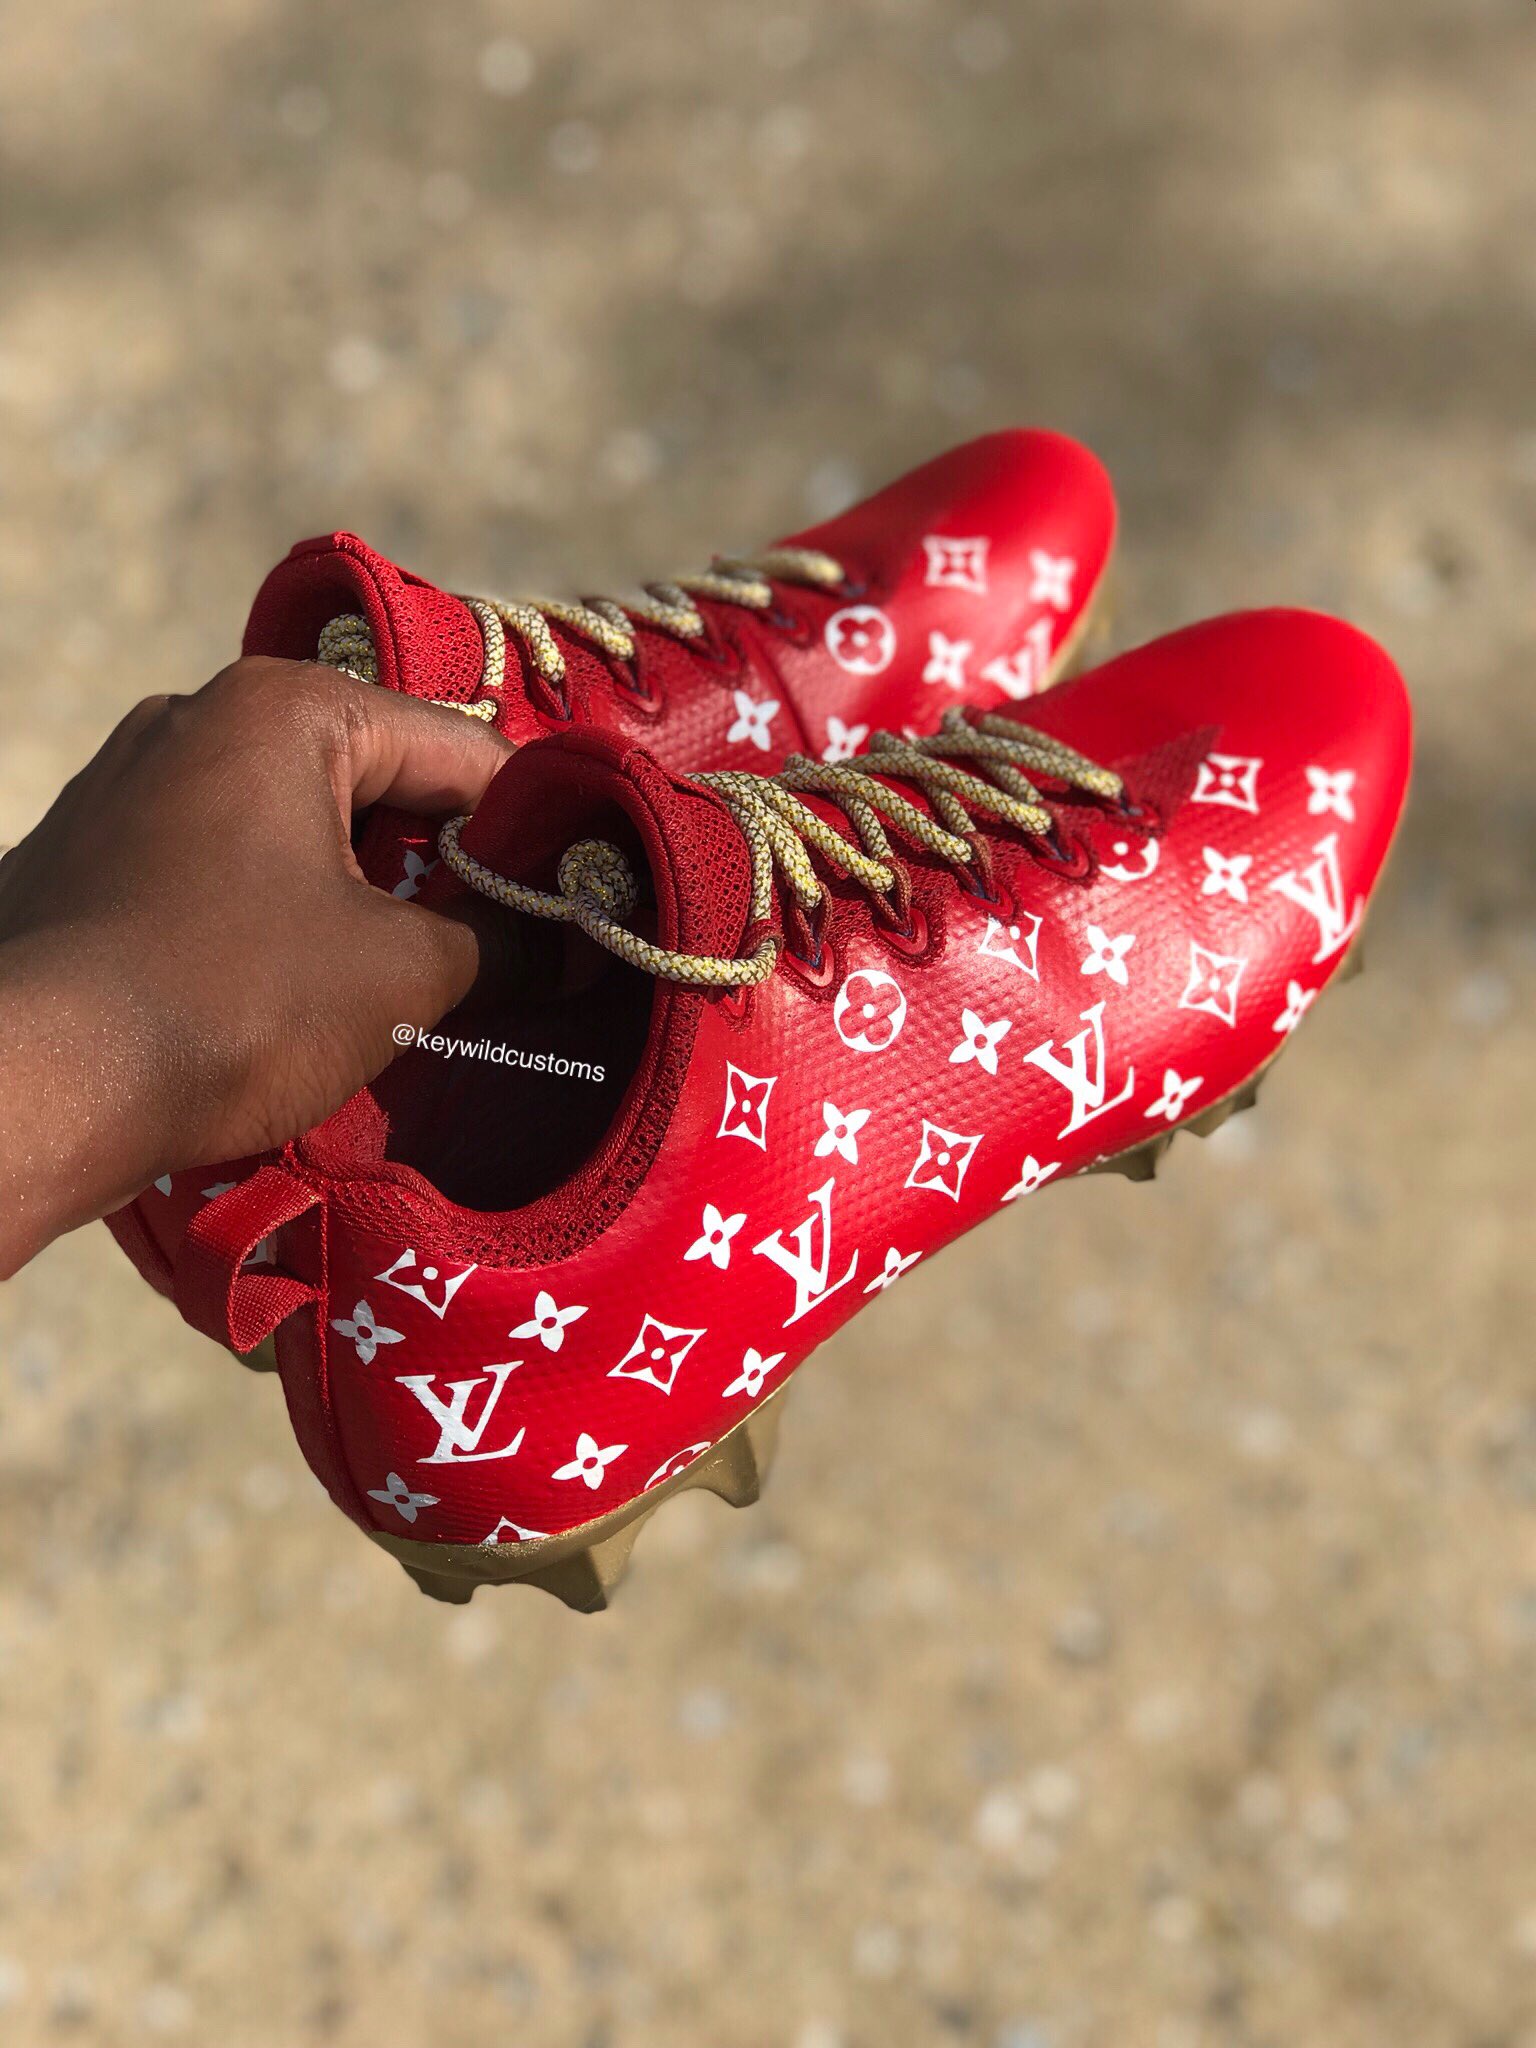 komfortabel lidelse scaring KWC on Twitter: "Custom LV Cleats! Want your own pair done? Dm me for  prices! #football #lacrosse #footballcleats #lacrossecleats #cleatstagram  #soccer #soccercleats #sneakers #sneakerhead #jacquard #jacquardproducts  https://t.co/7VvhvEBuk5" / Twitter